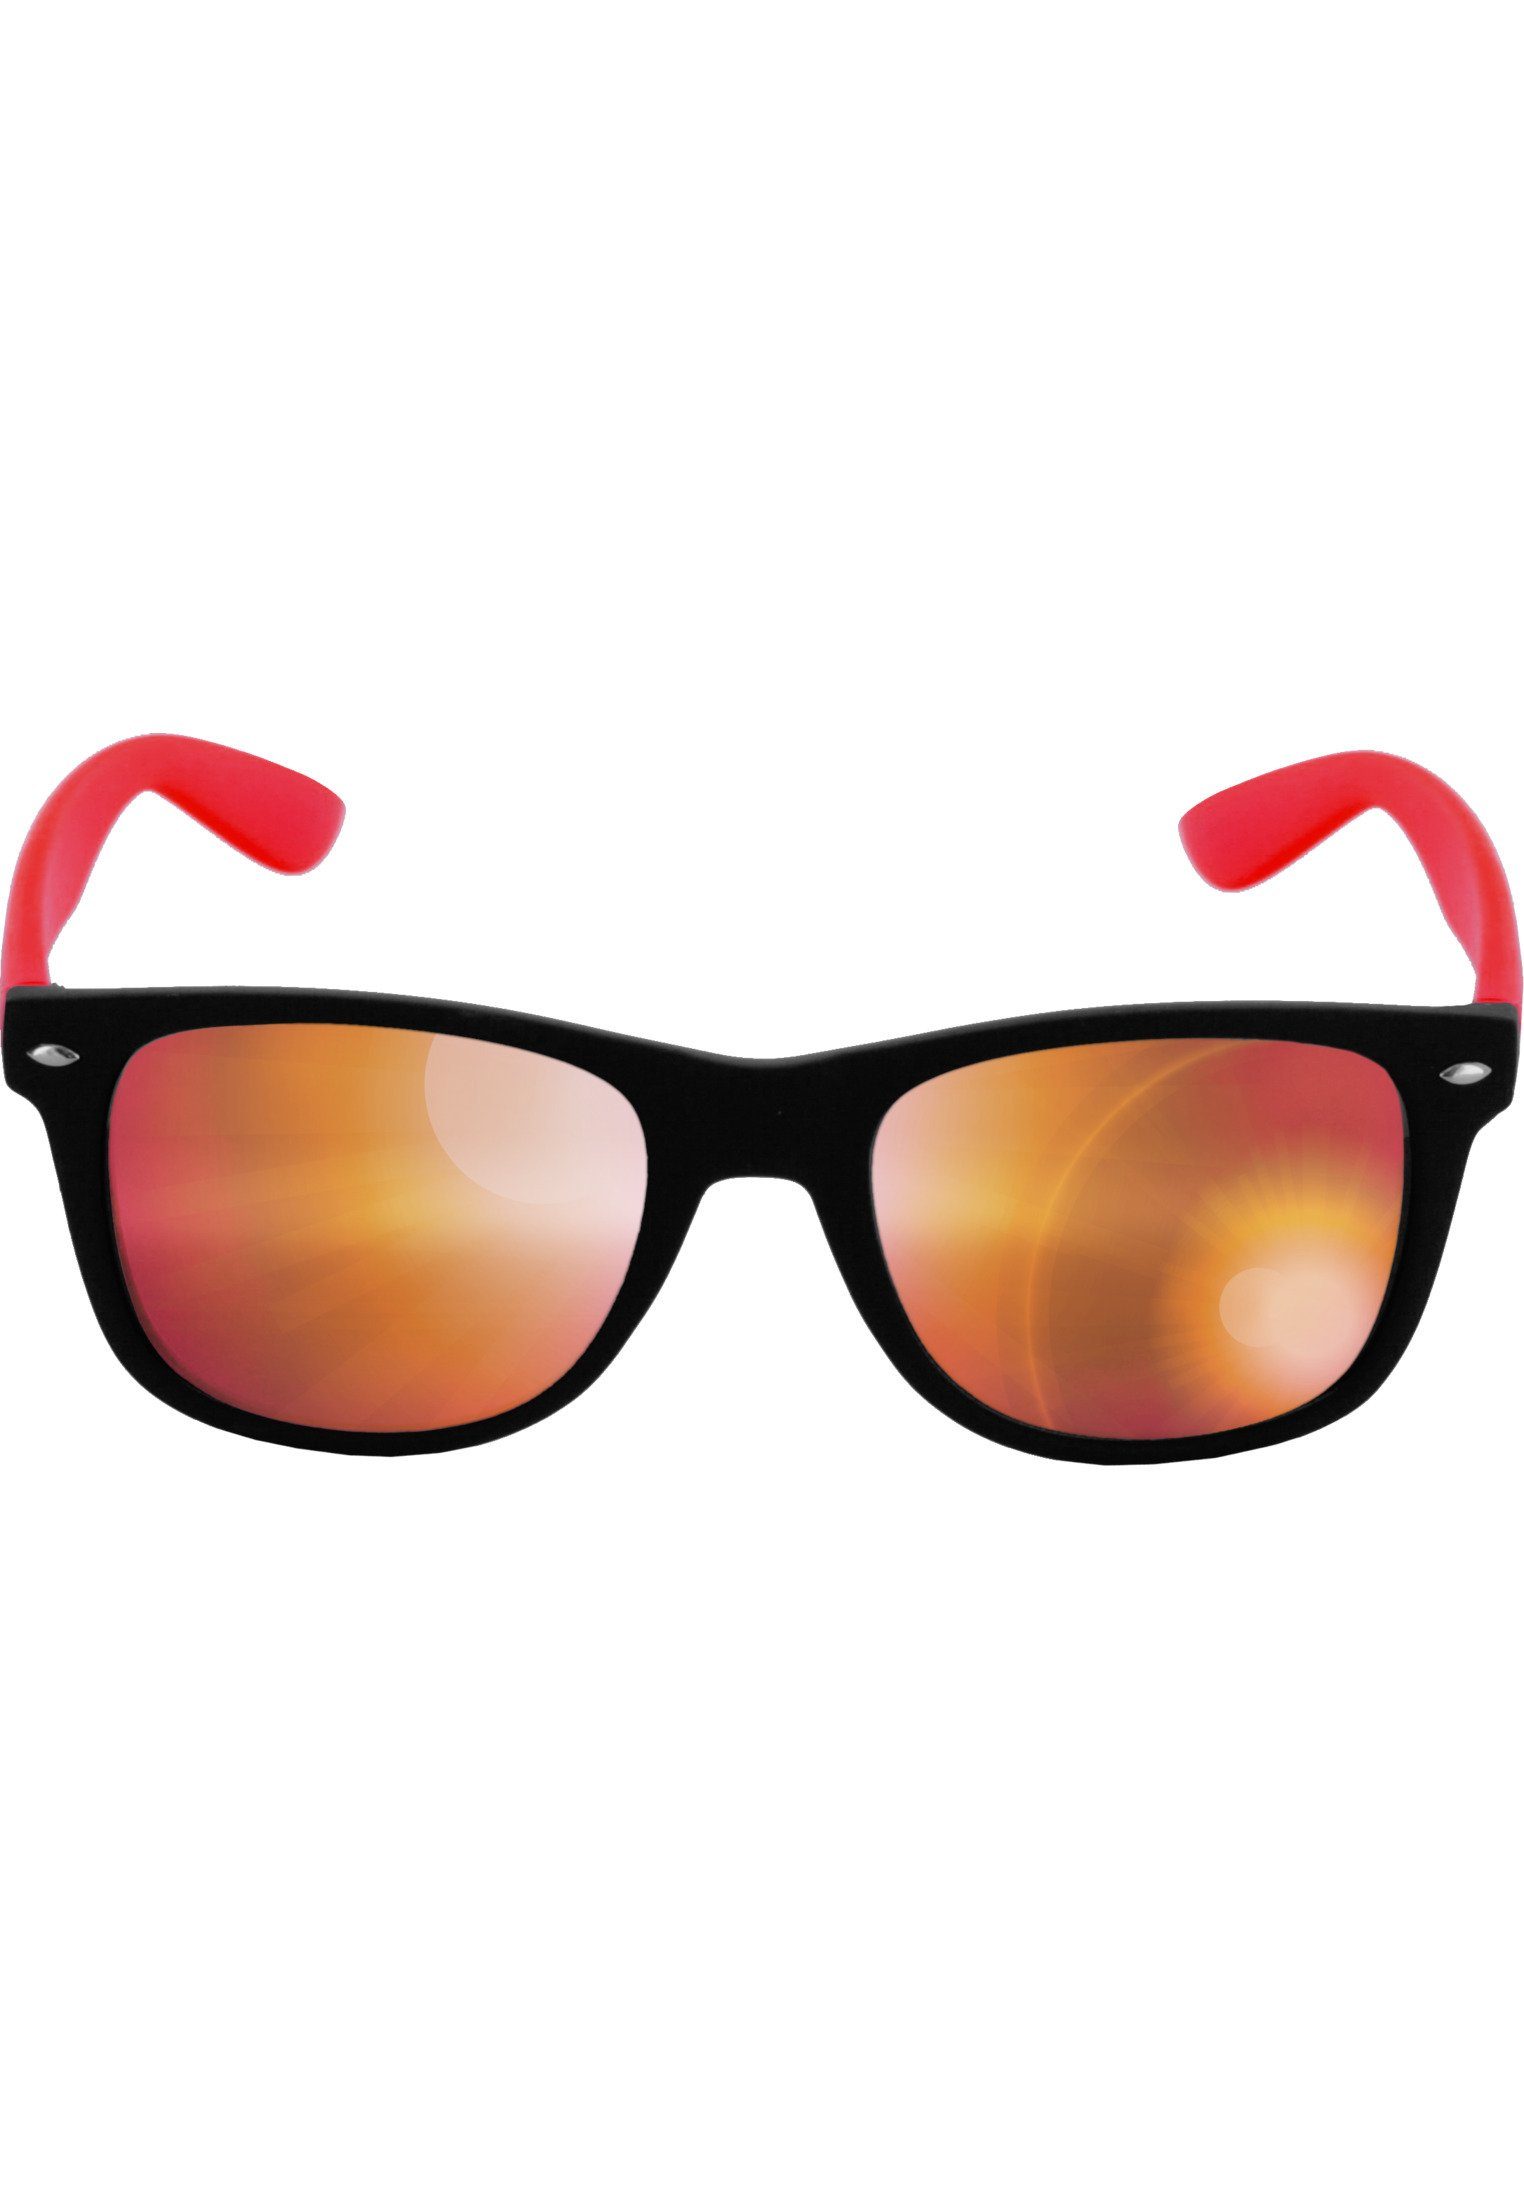 Mirror blk/red/red Likoma Sunglasses Accessoires MSTRDS Sonnenbrille